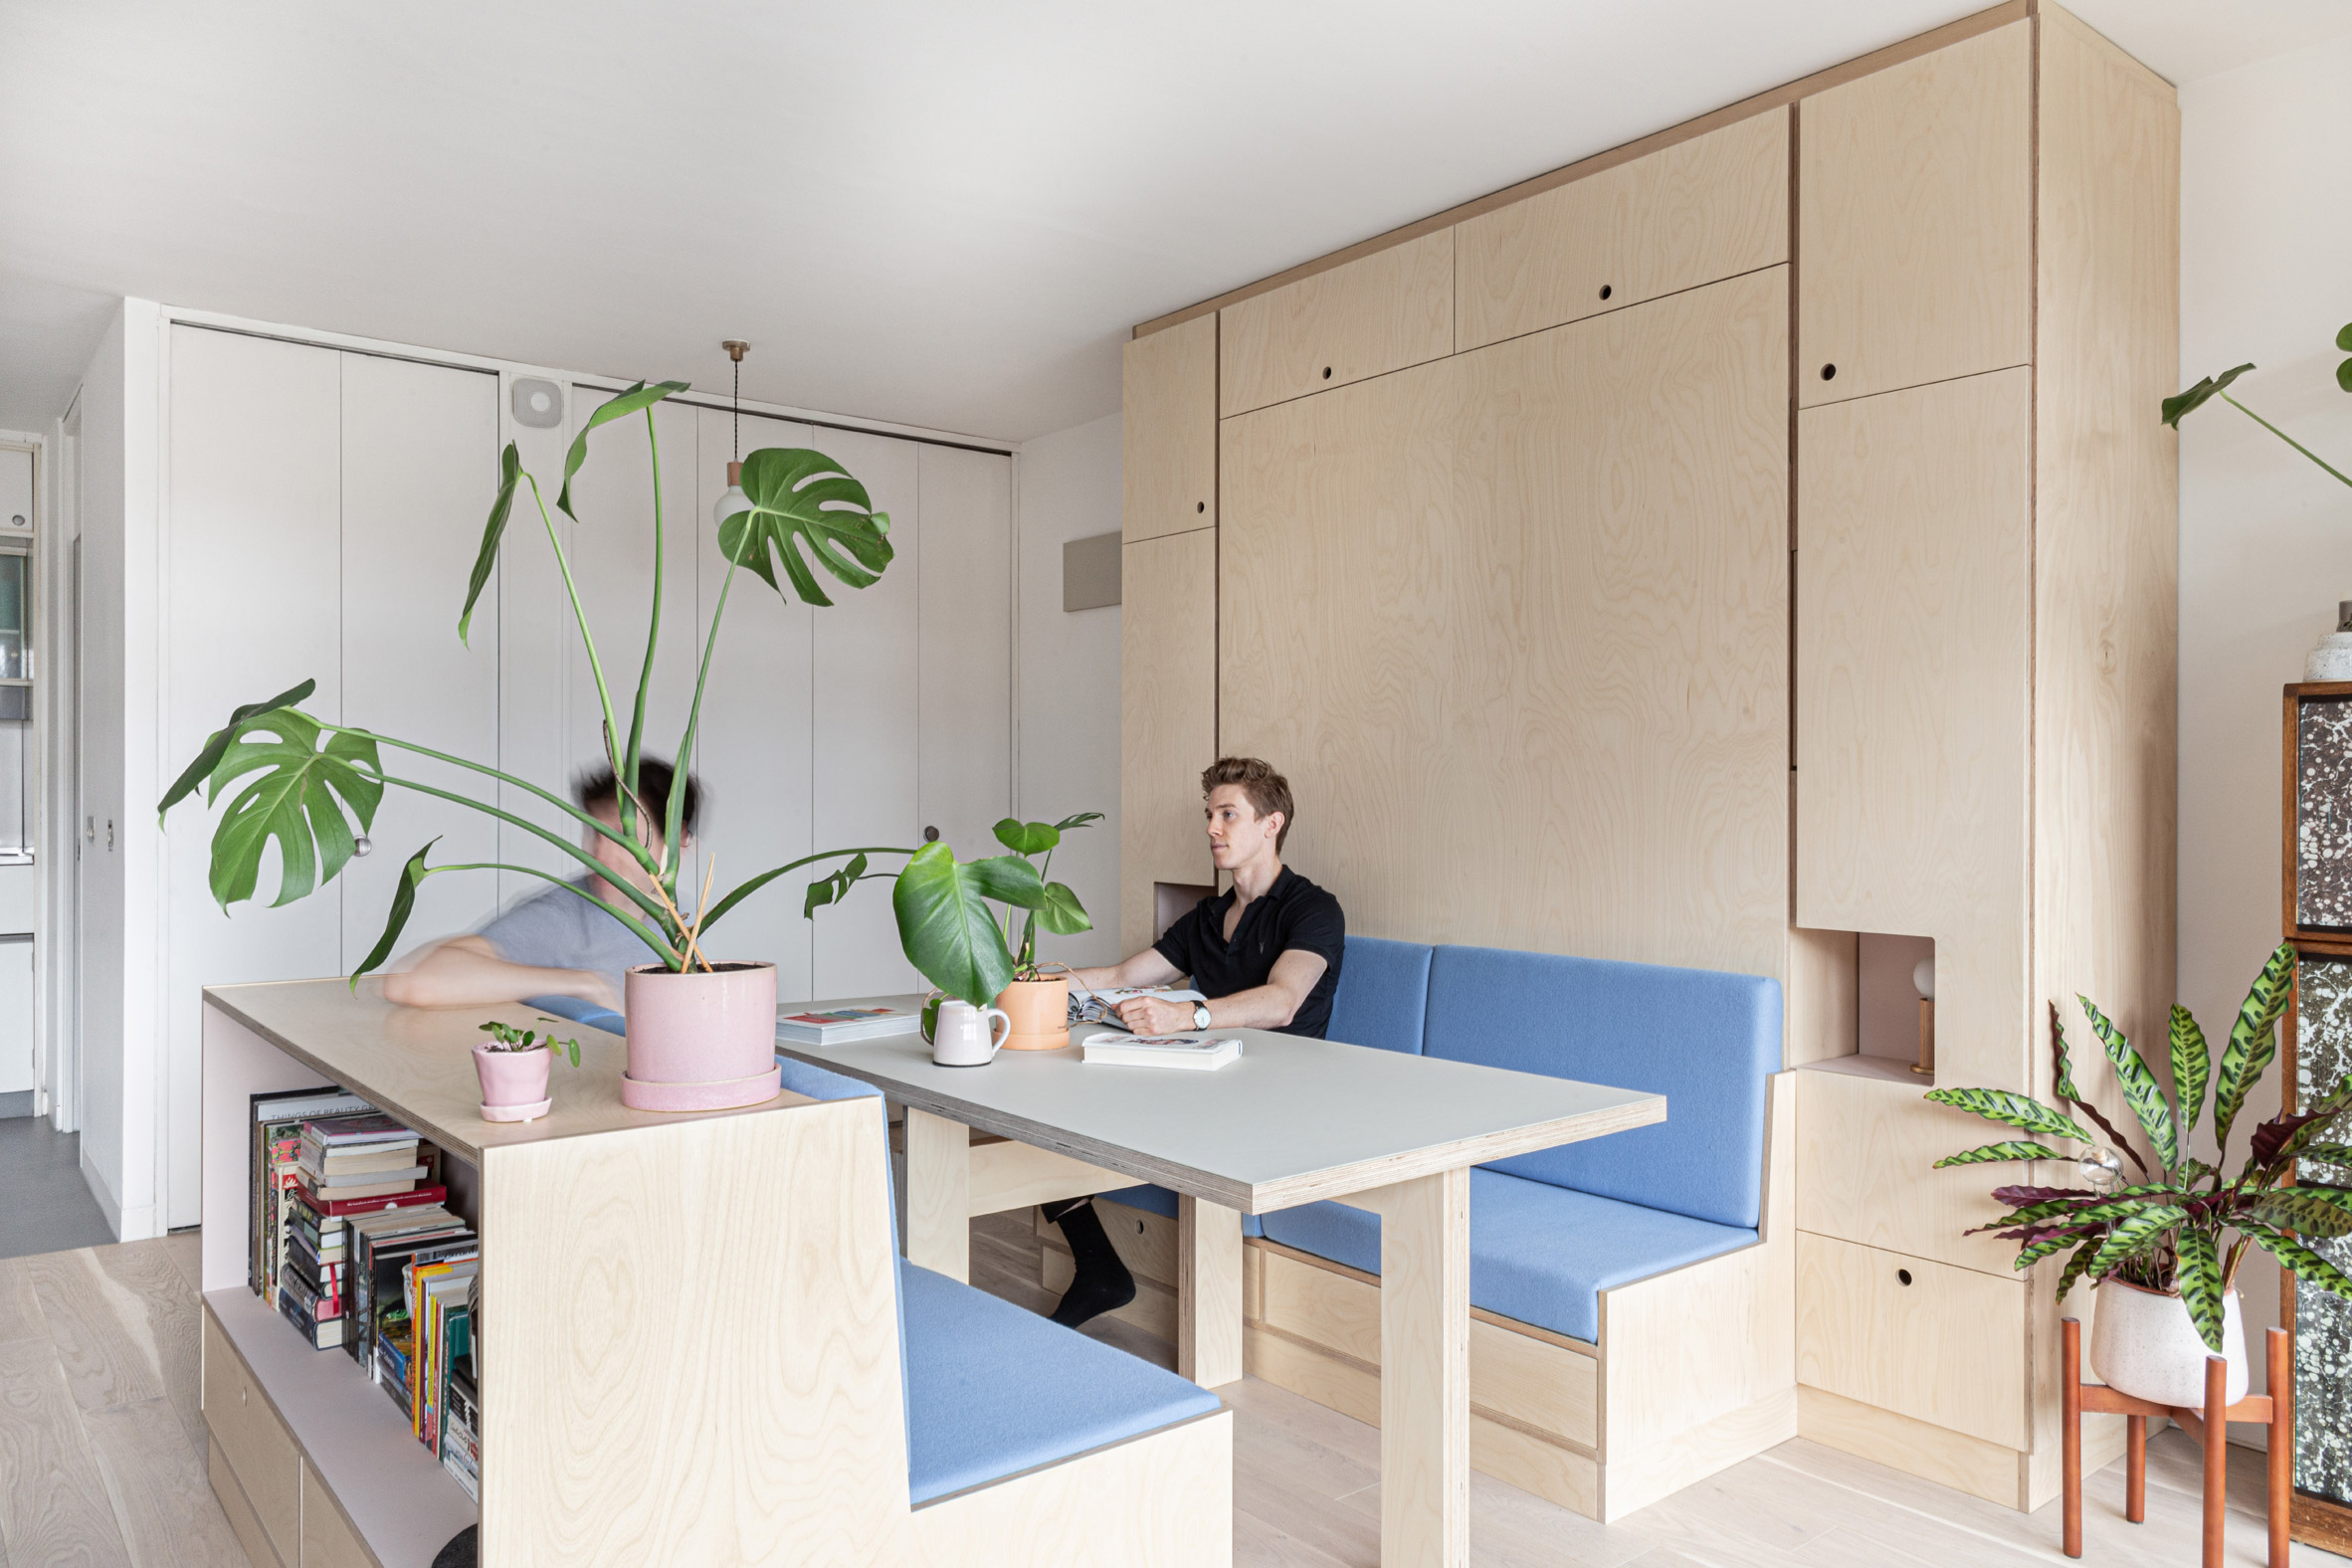 Barbican Dancer's Studio by Intervention Architecture dining table